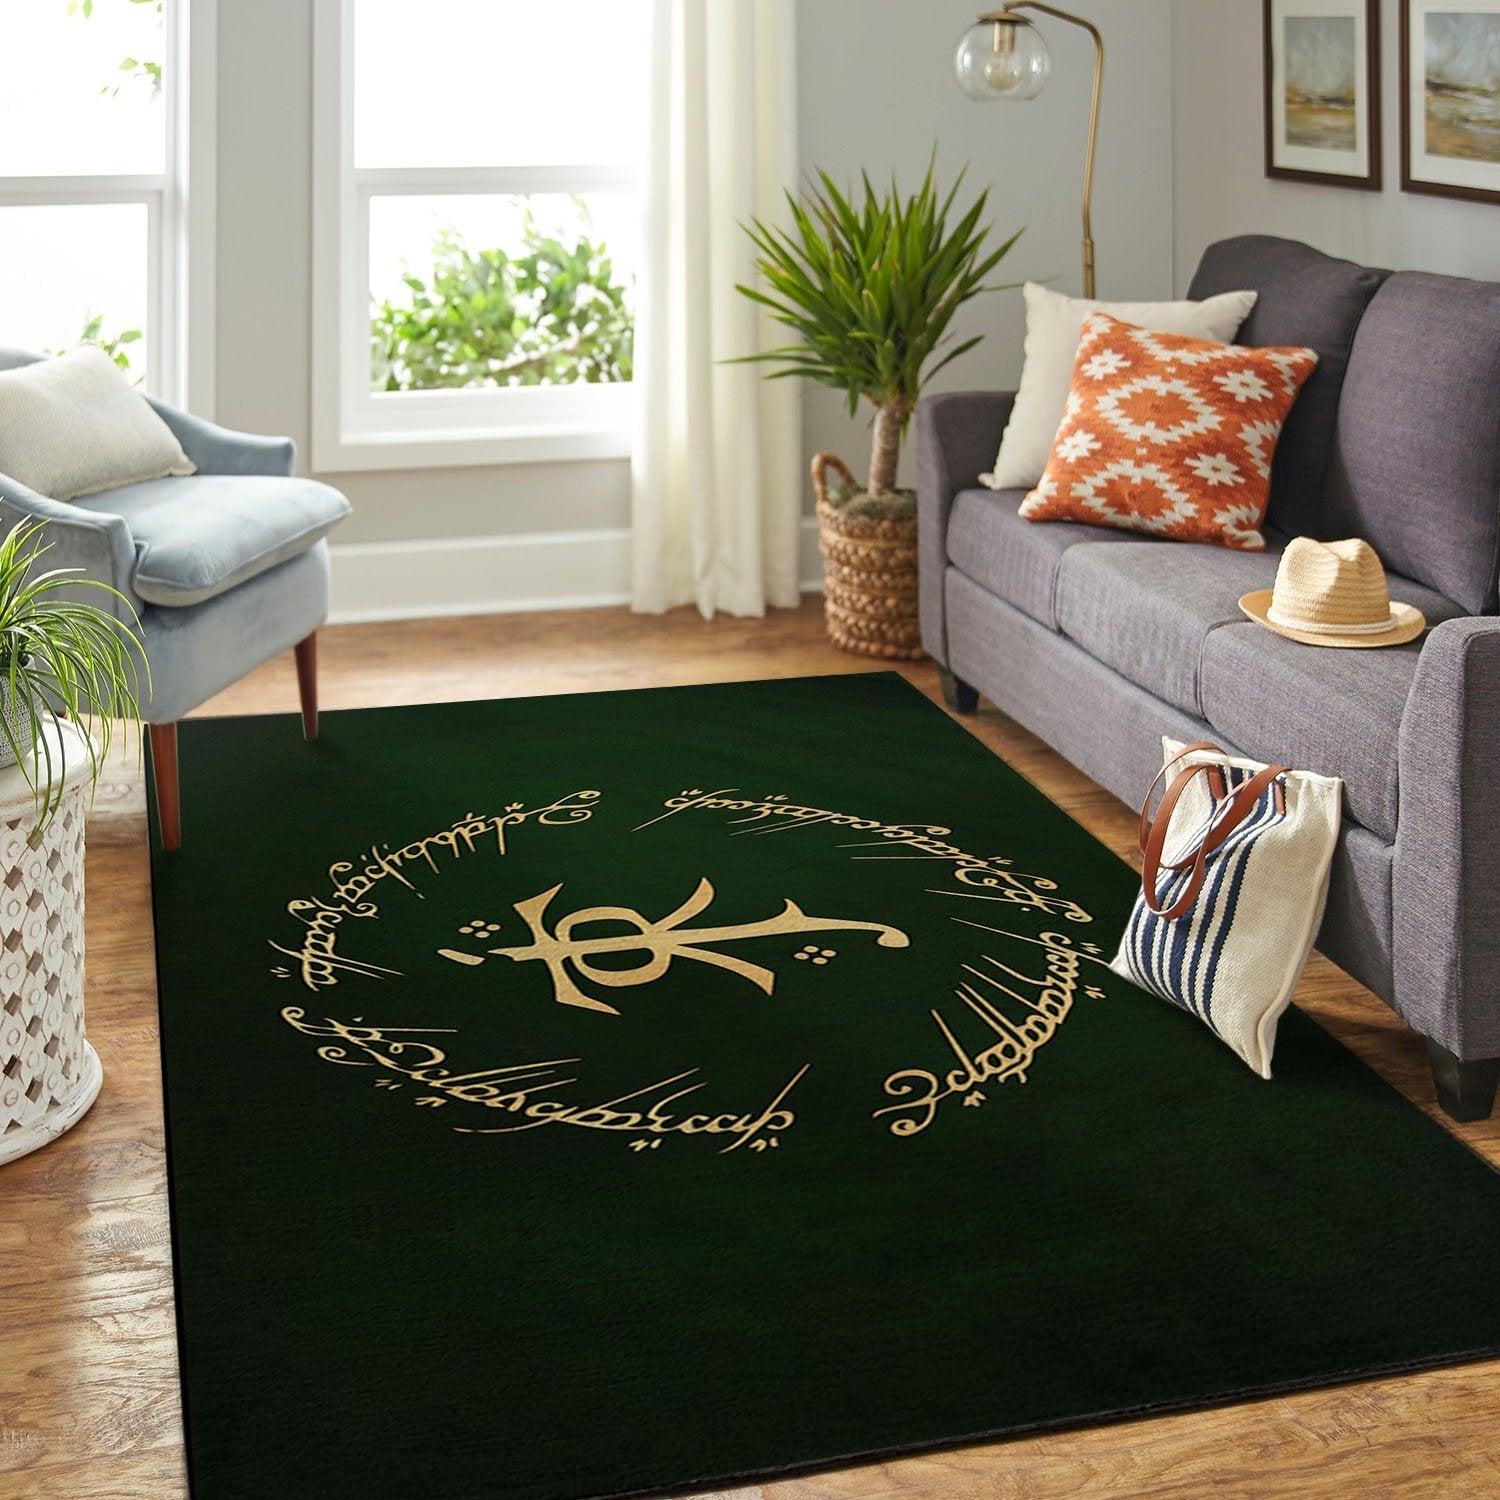 Lord Of The Rings 5 Area Rug Floor Home Room Decor